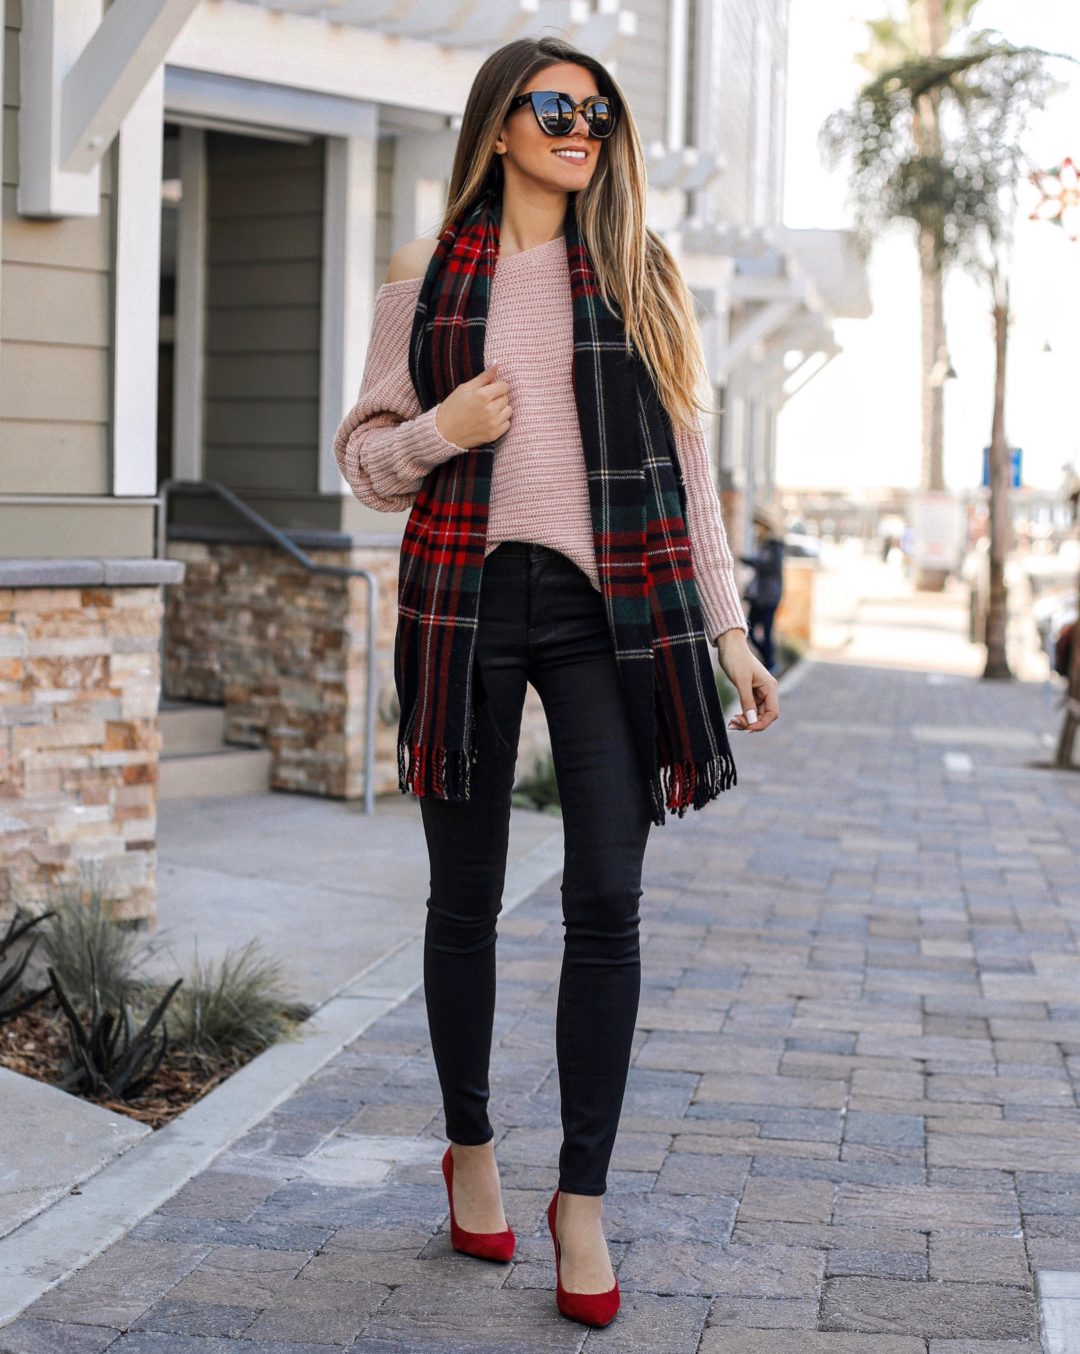 The Charming Olive Adelina Perrin Wearing a holiday Plaid Scarf and Cozy Sweater